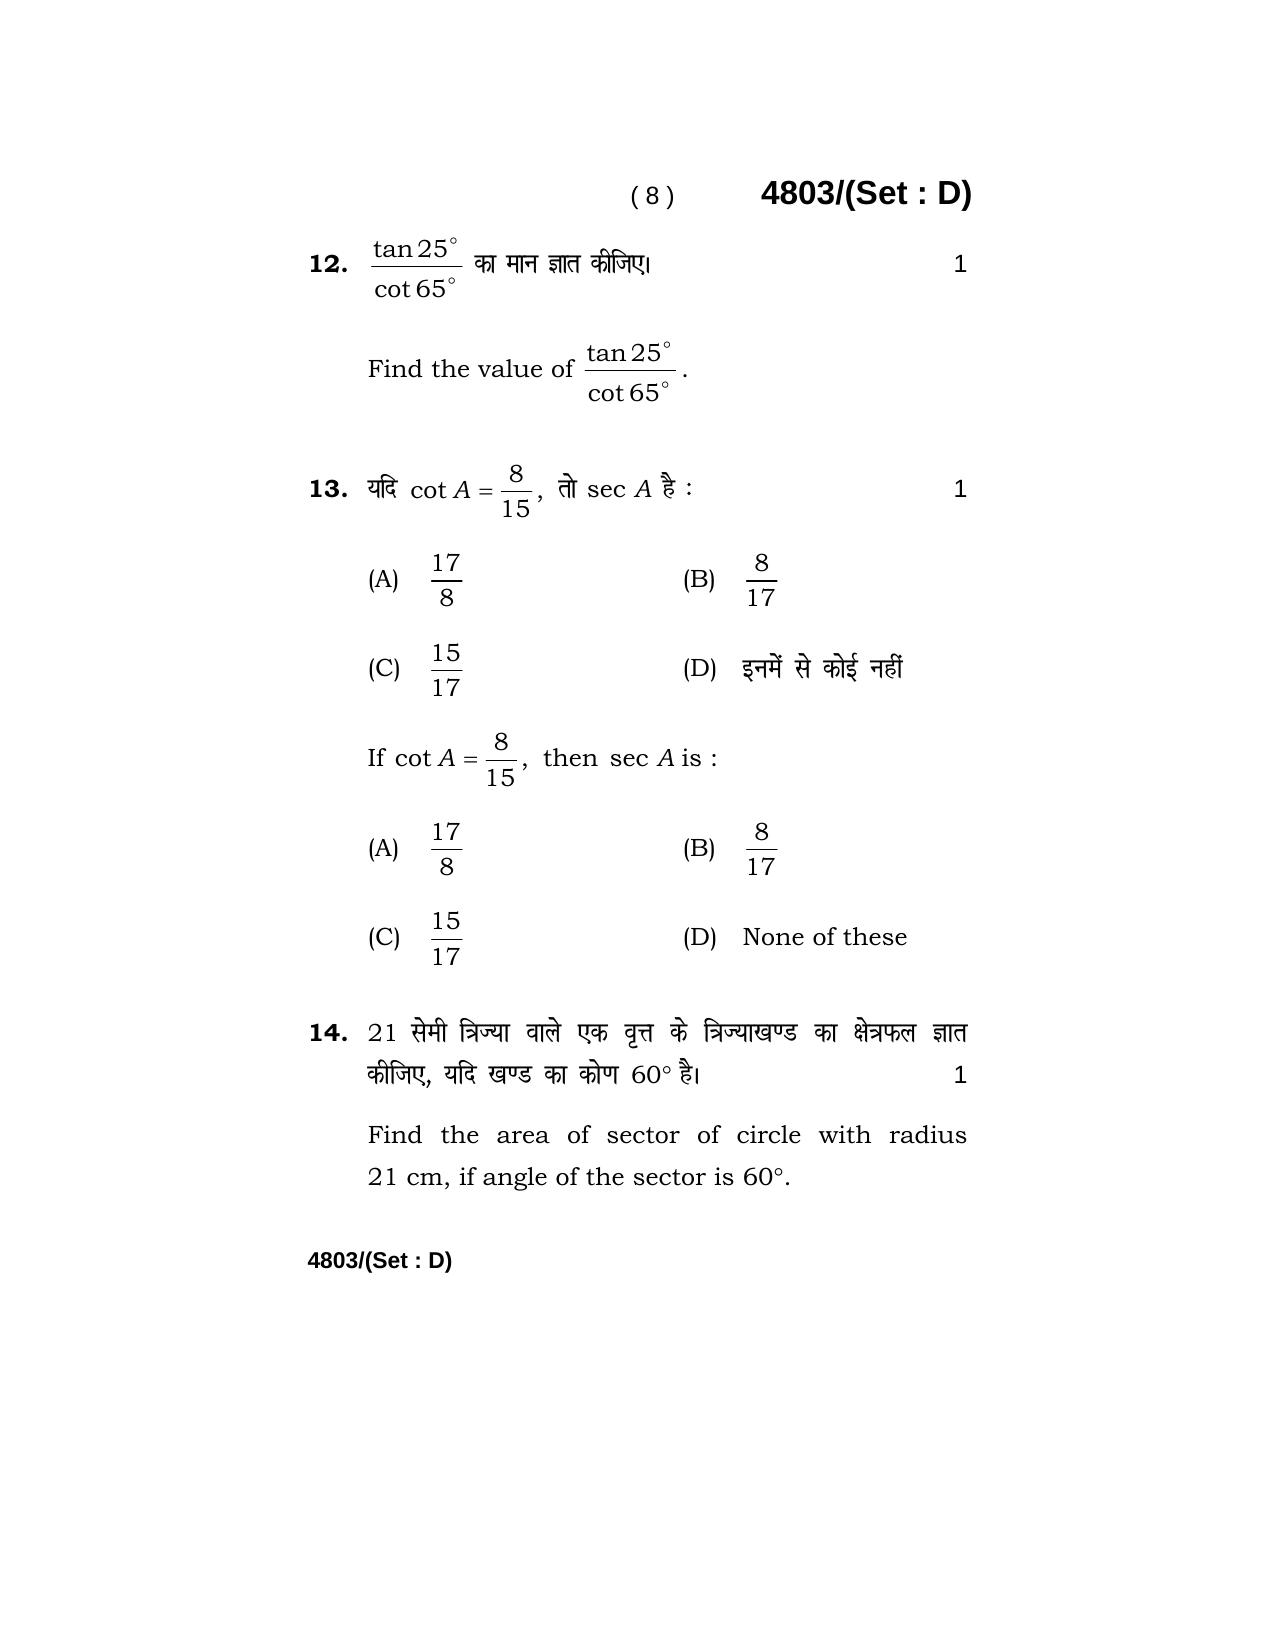 Haryana Board HBSE Class 10 Mathematics 2020 Question Paper - Page 56